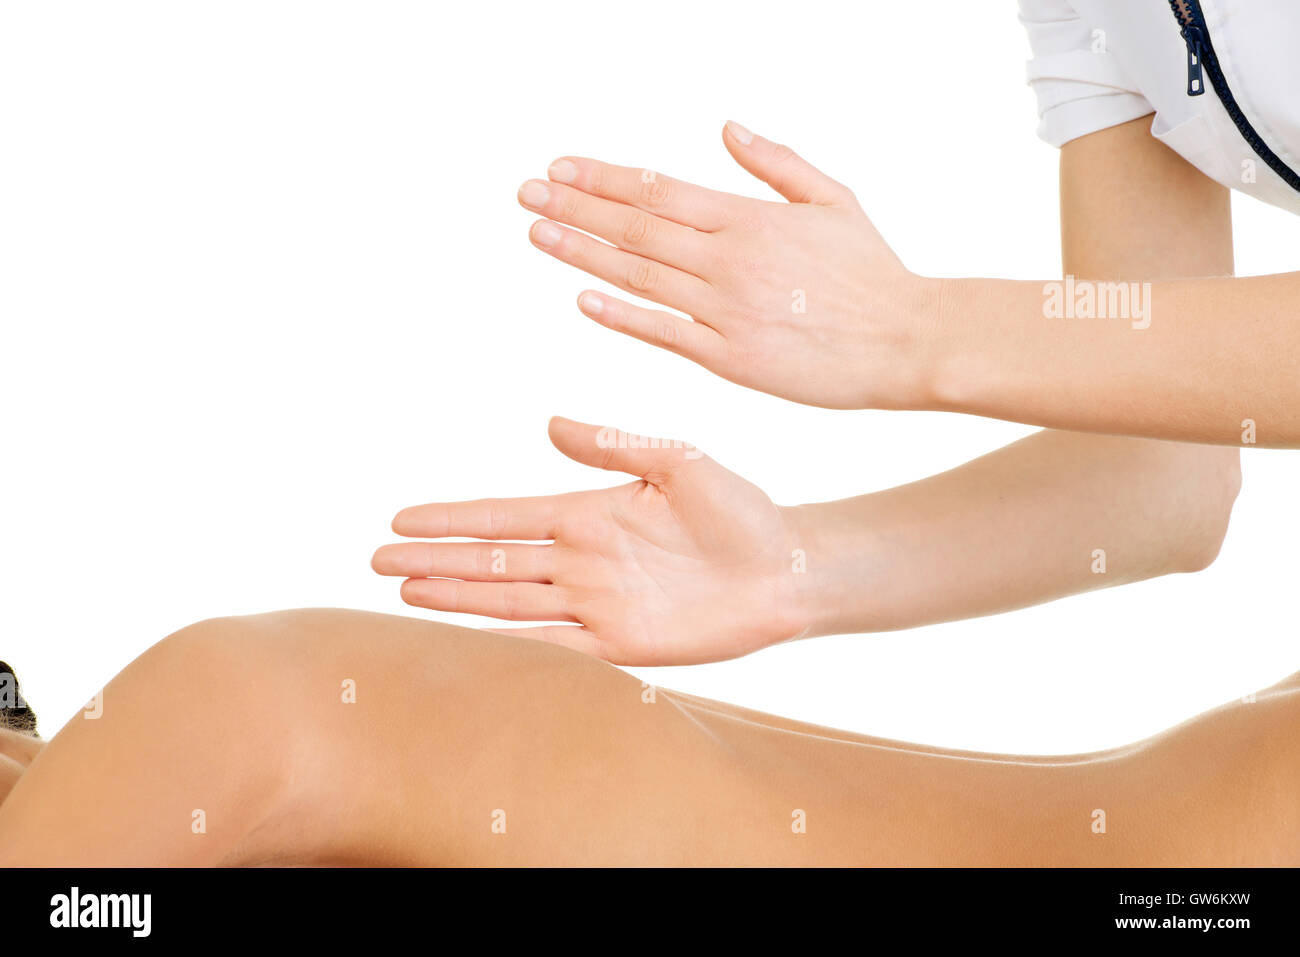 Preaty young woman relaxing beeing massaged Stock Photo